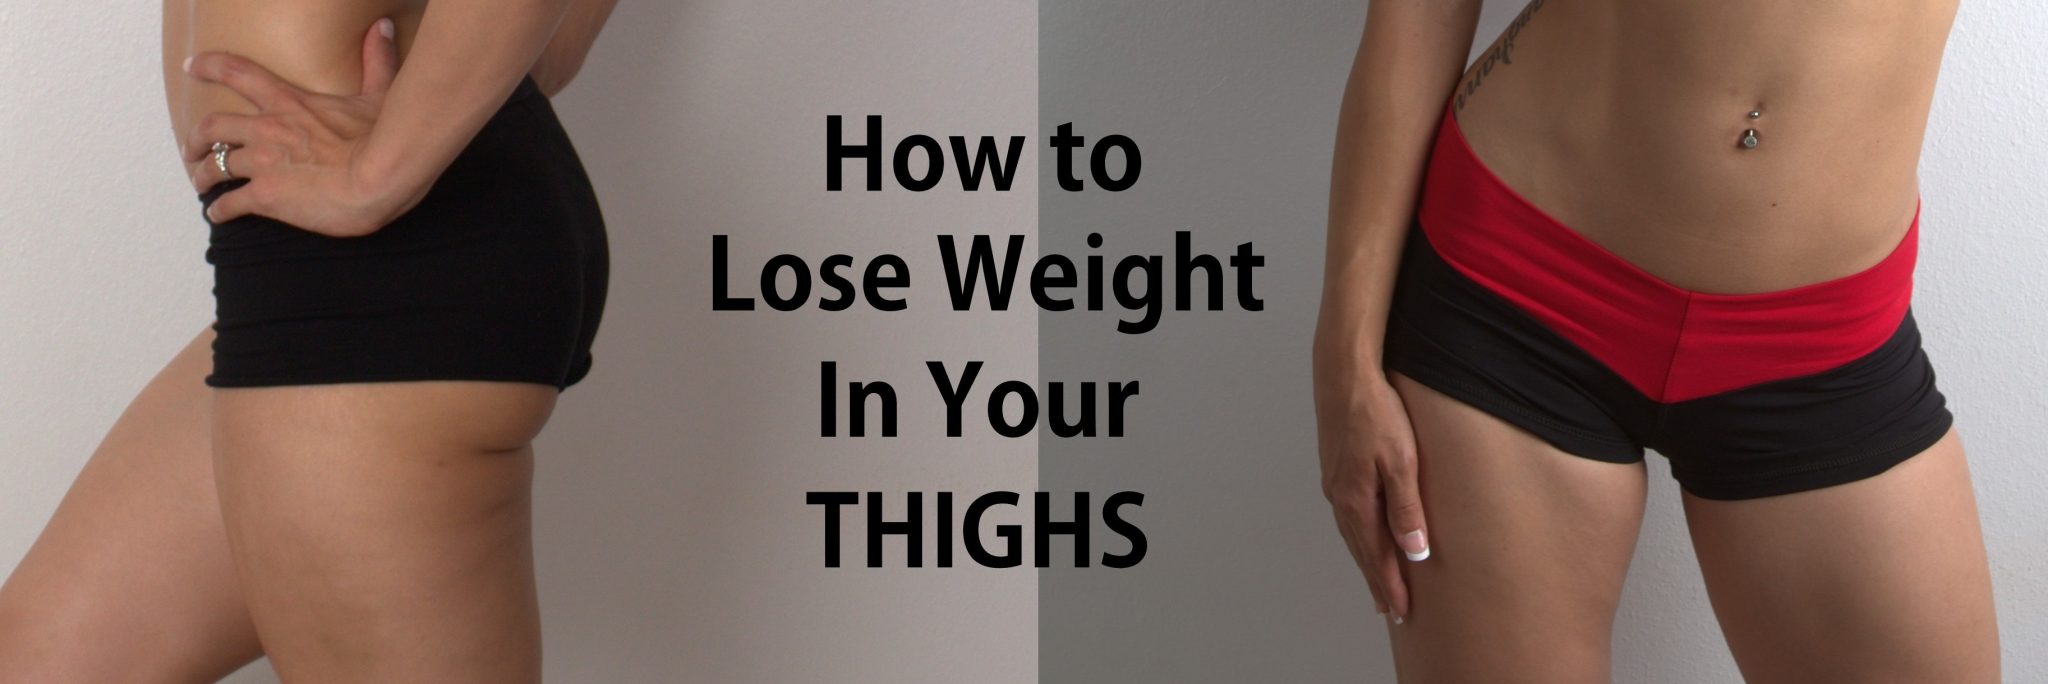 How To Loose Fat In Thighs 67